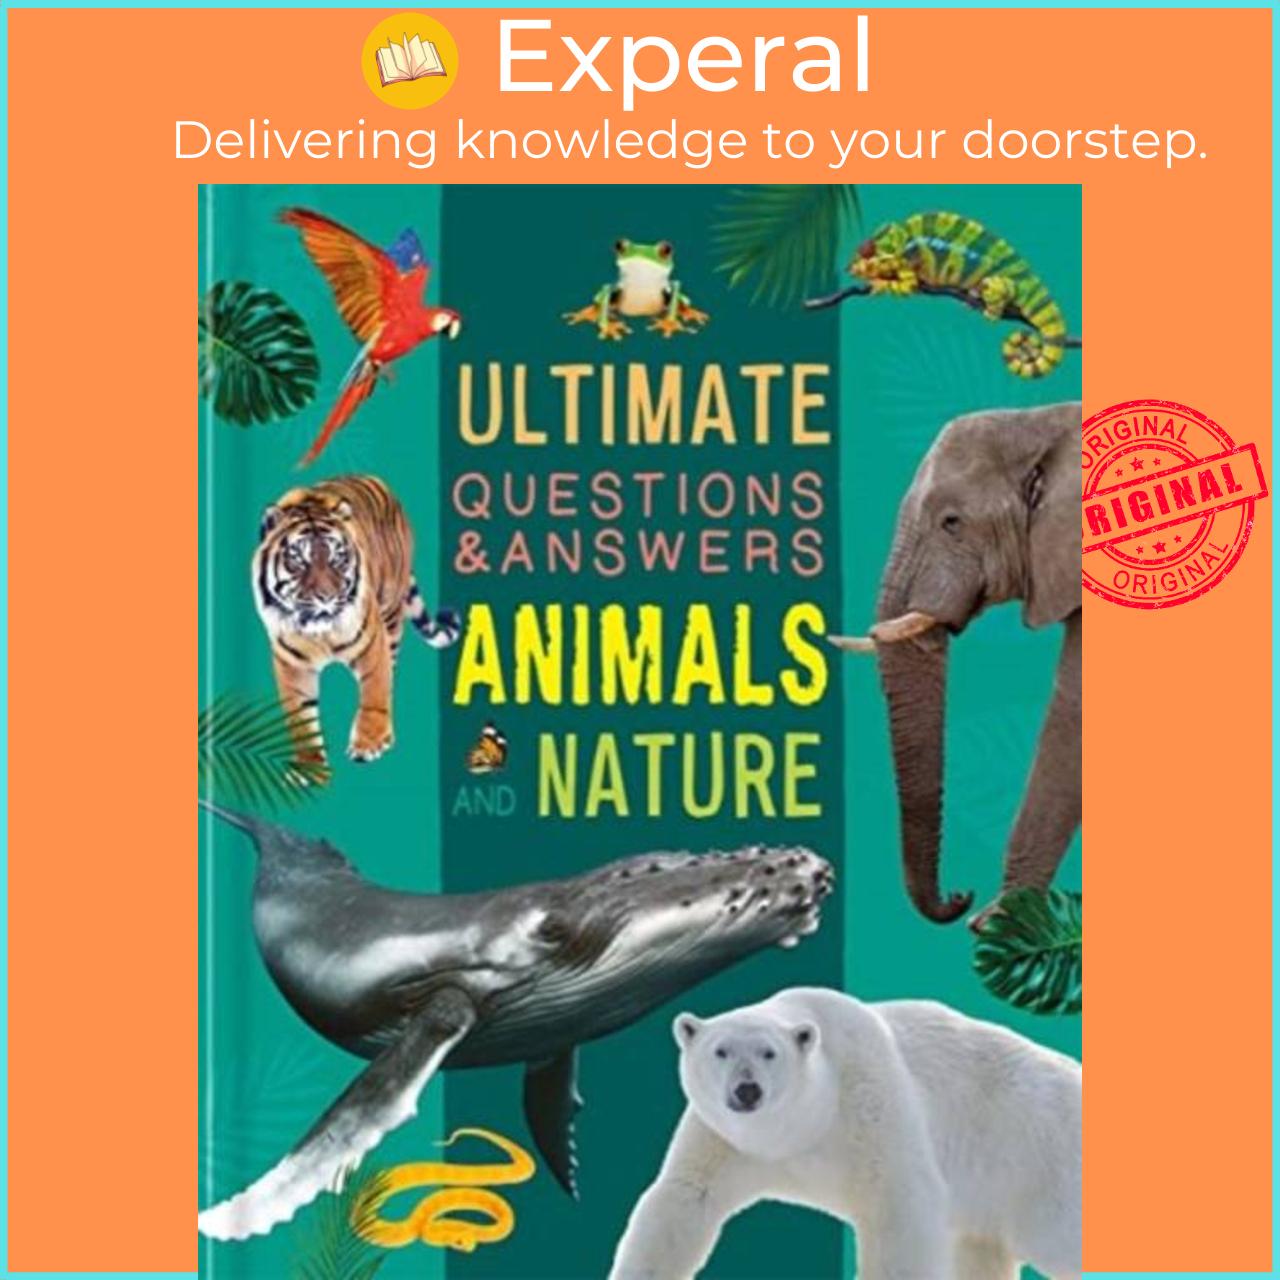 Sách - Ultimate Questions & Answers: Animals and Nature by Autumn Publishing (UK edition, hardcover)